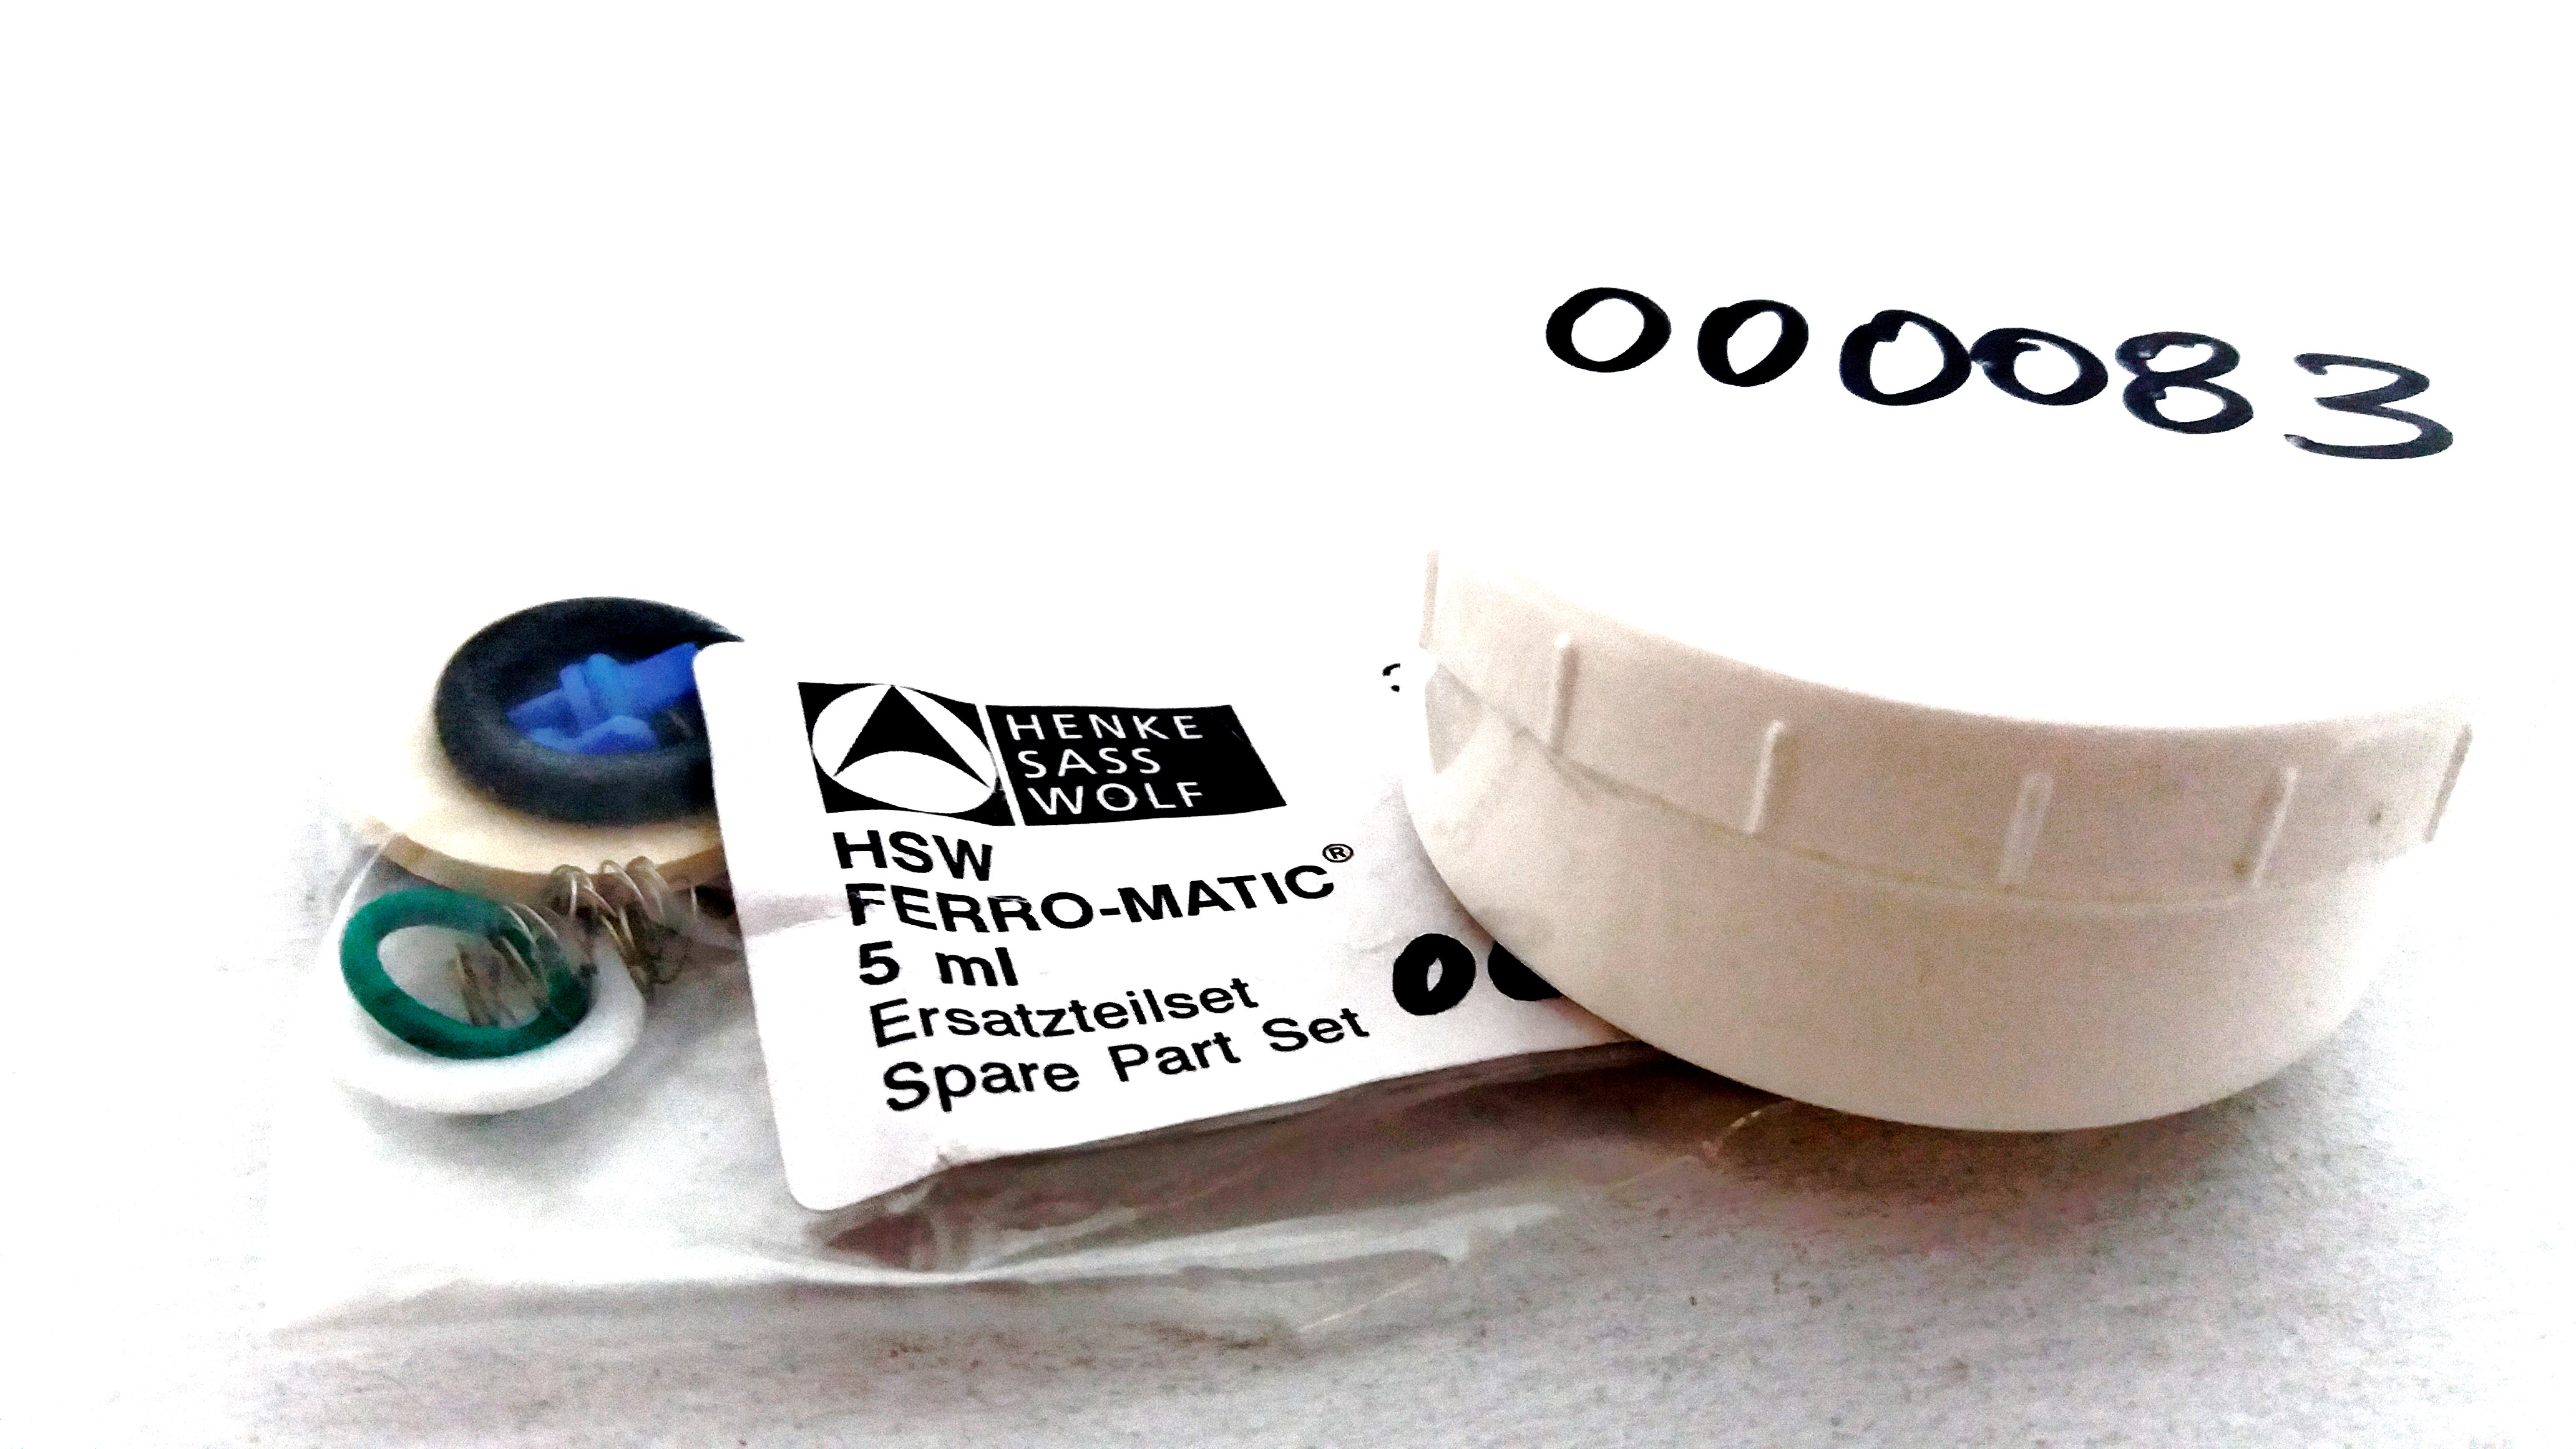 Spare Part-Set for HSW FERRO-MATIC 5 ml